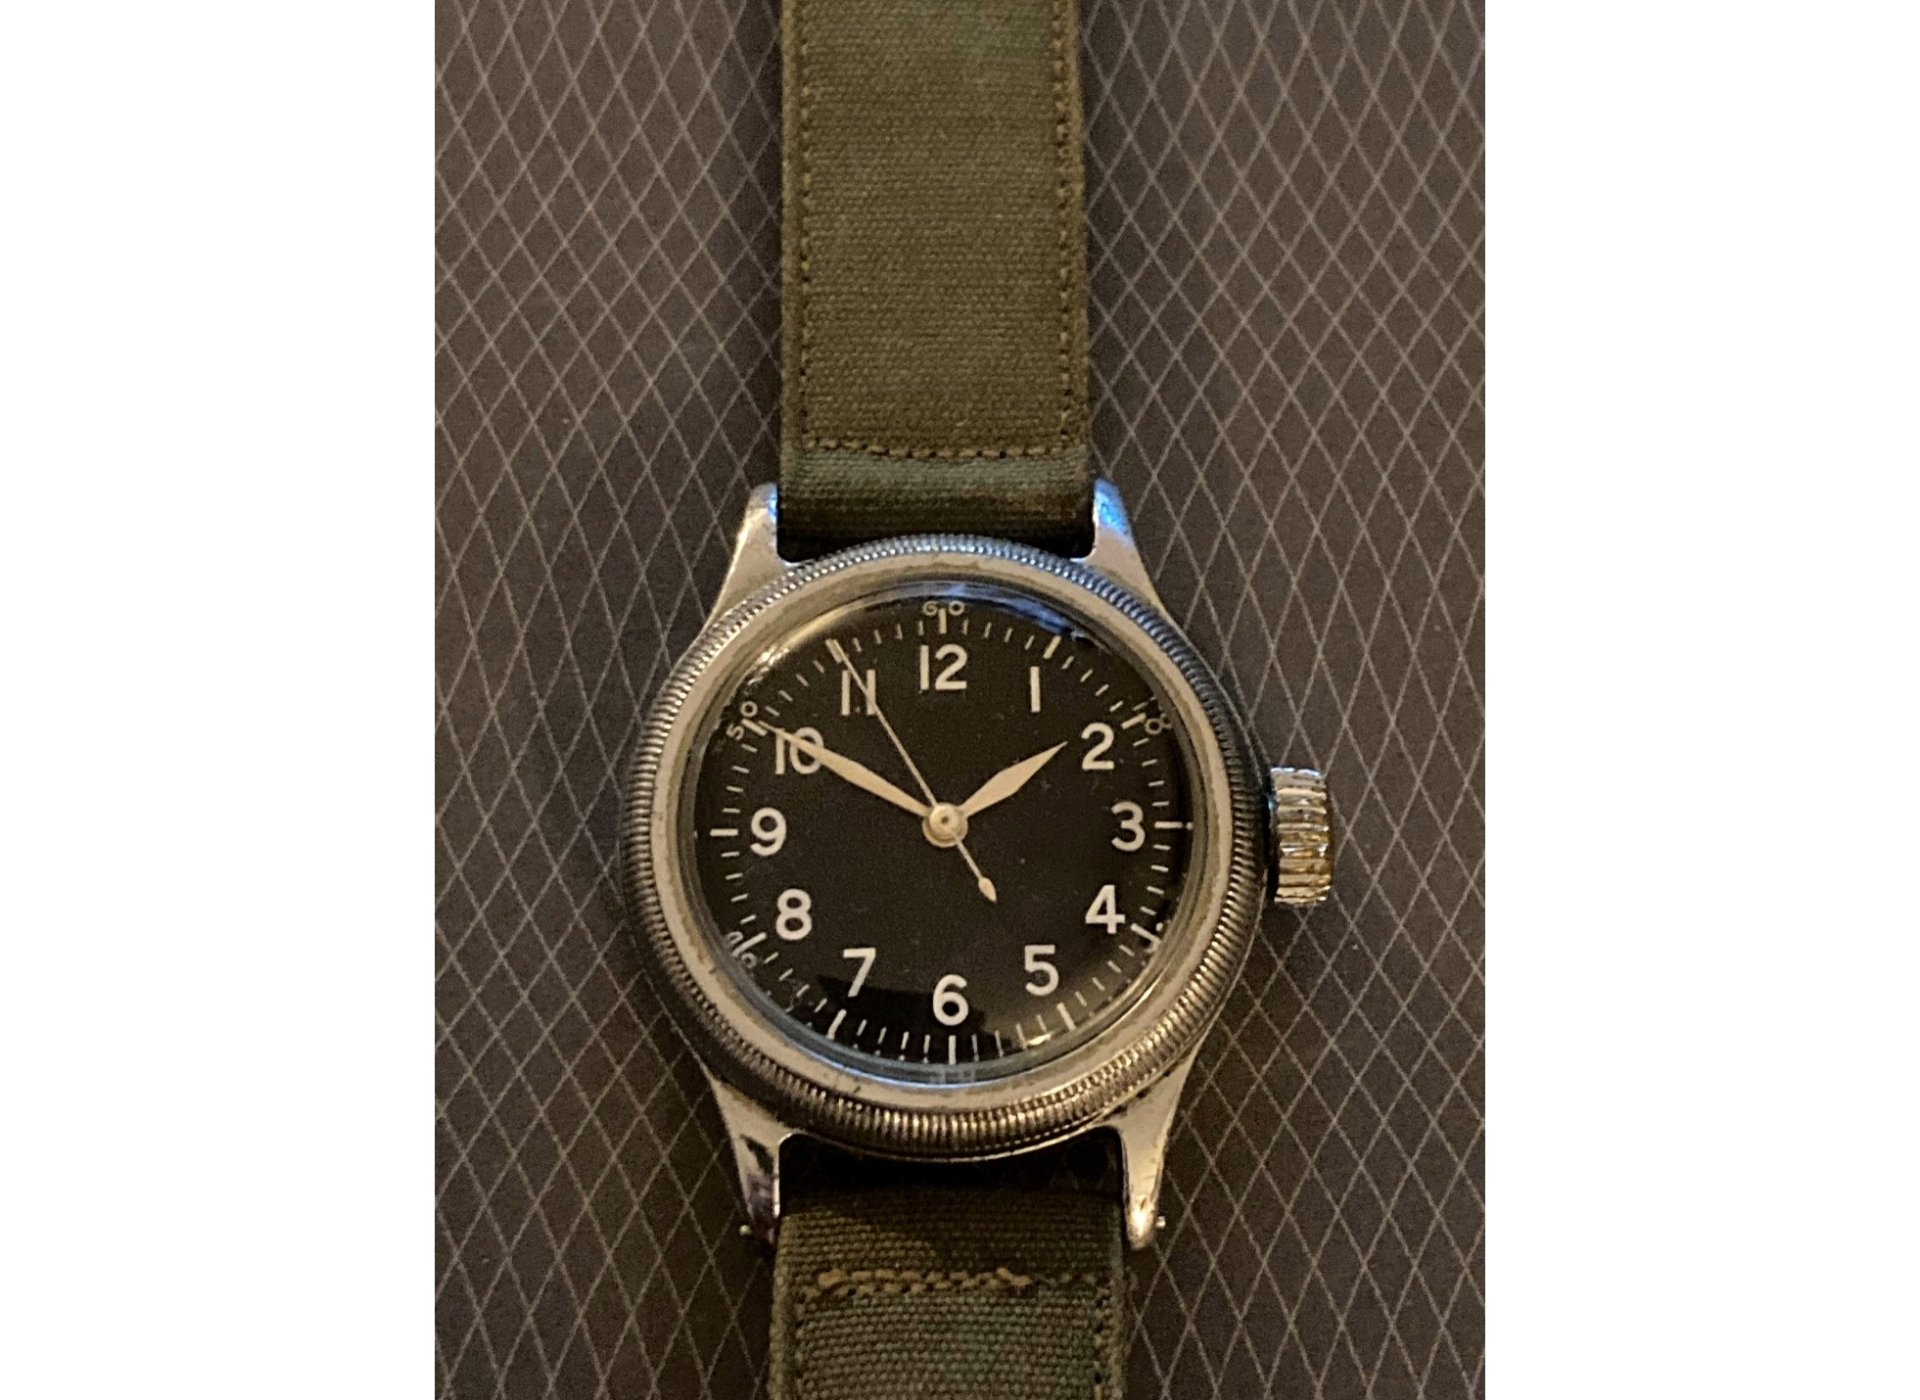 Bulova A-11 Avigation watch for USAAF 1944 contract